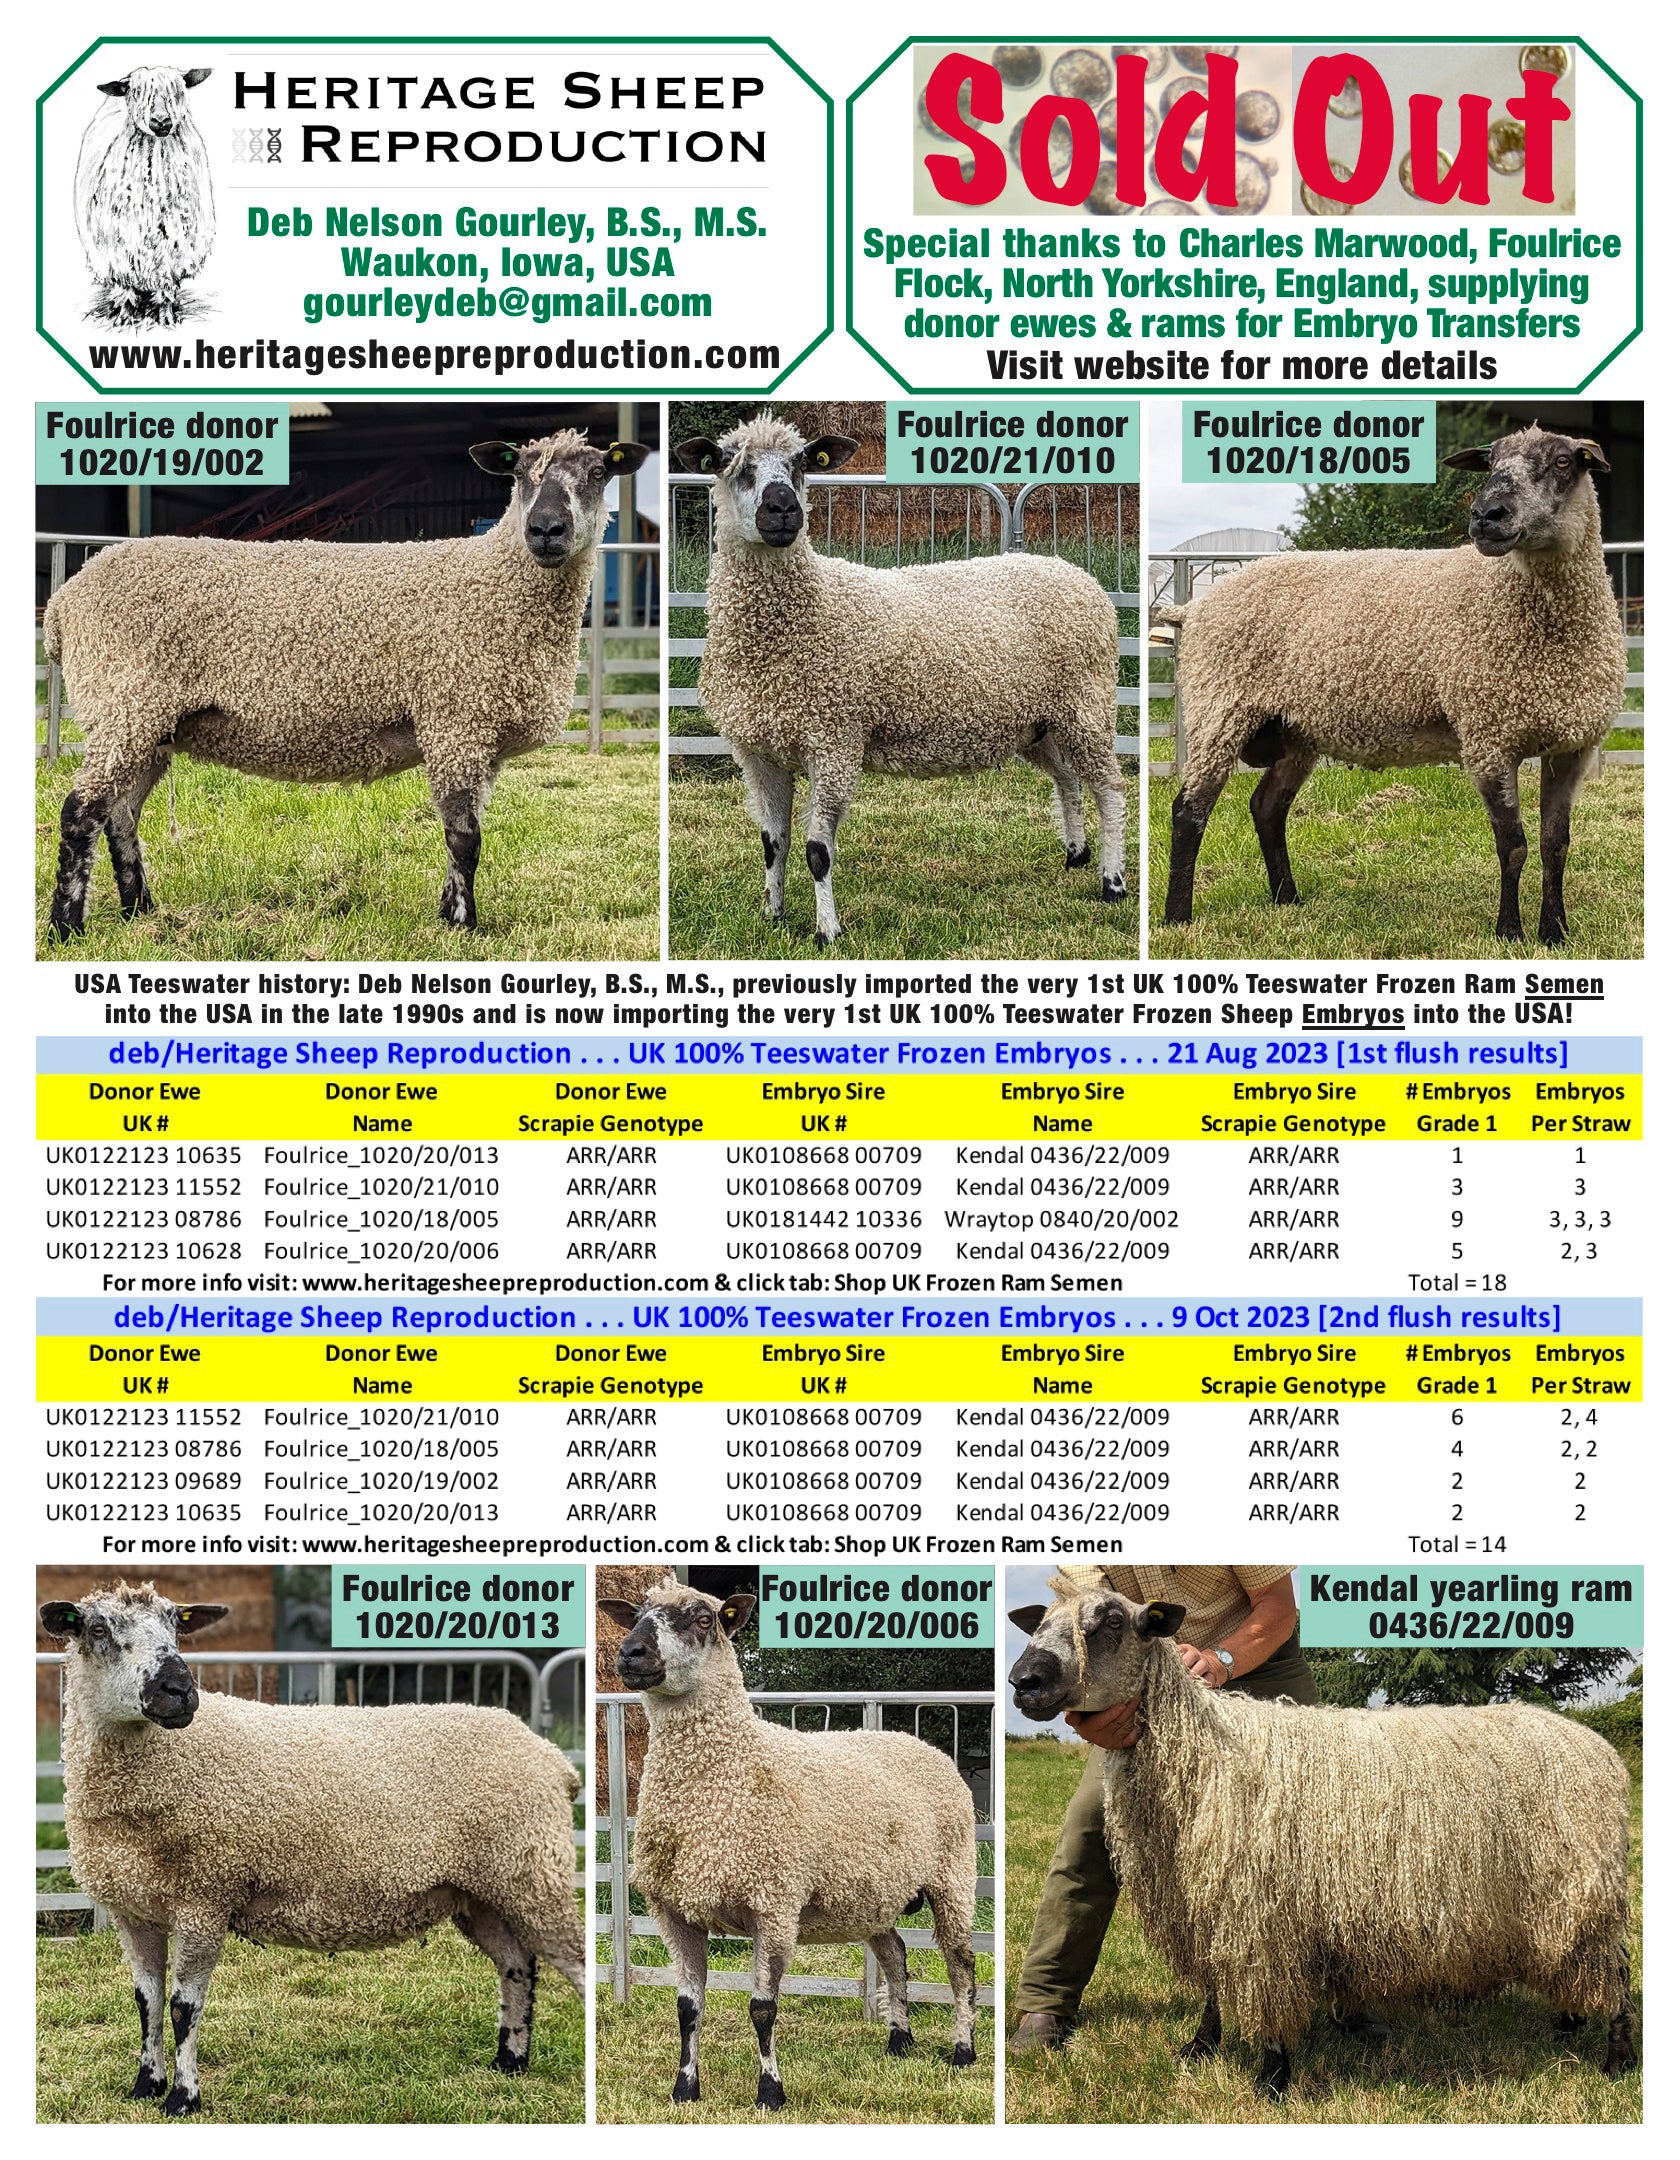 Teeswater 100% UK Embryos from Donor Ewes & Rams - in UK/AI Centre - Sold Out